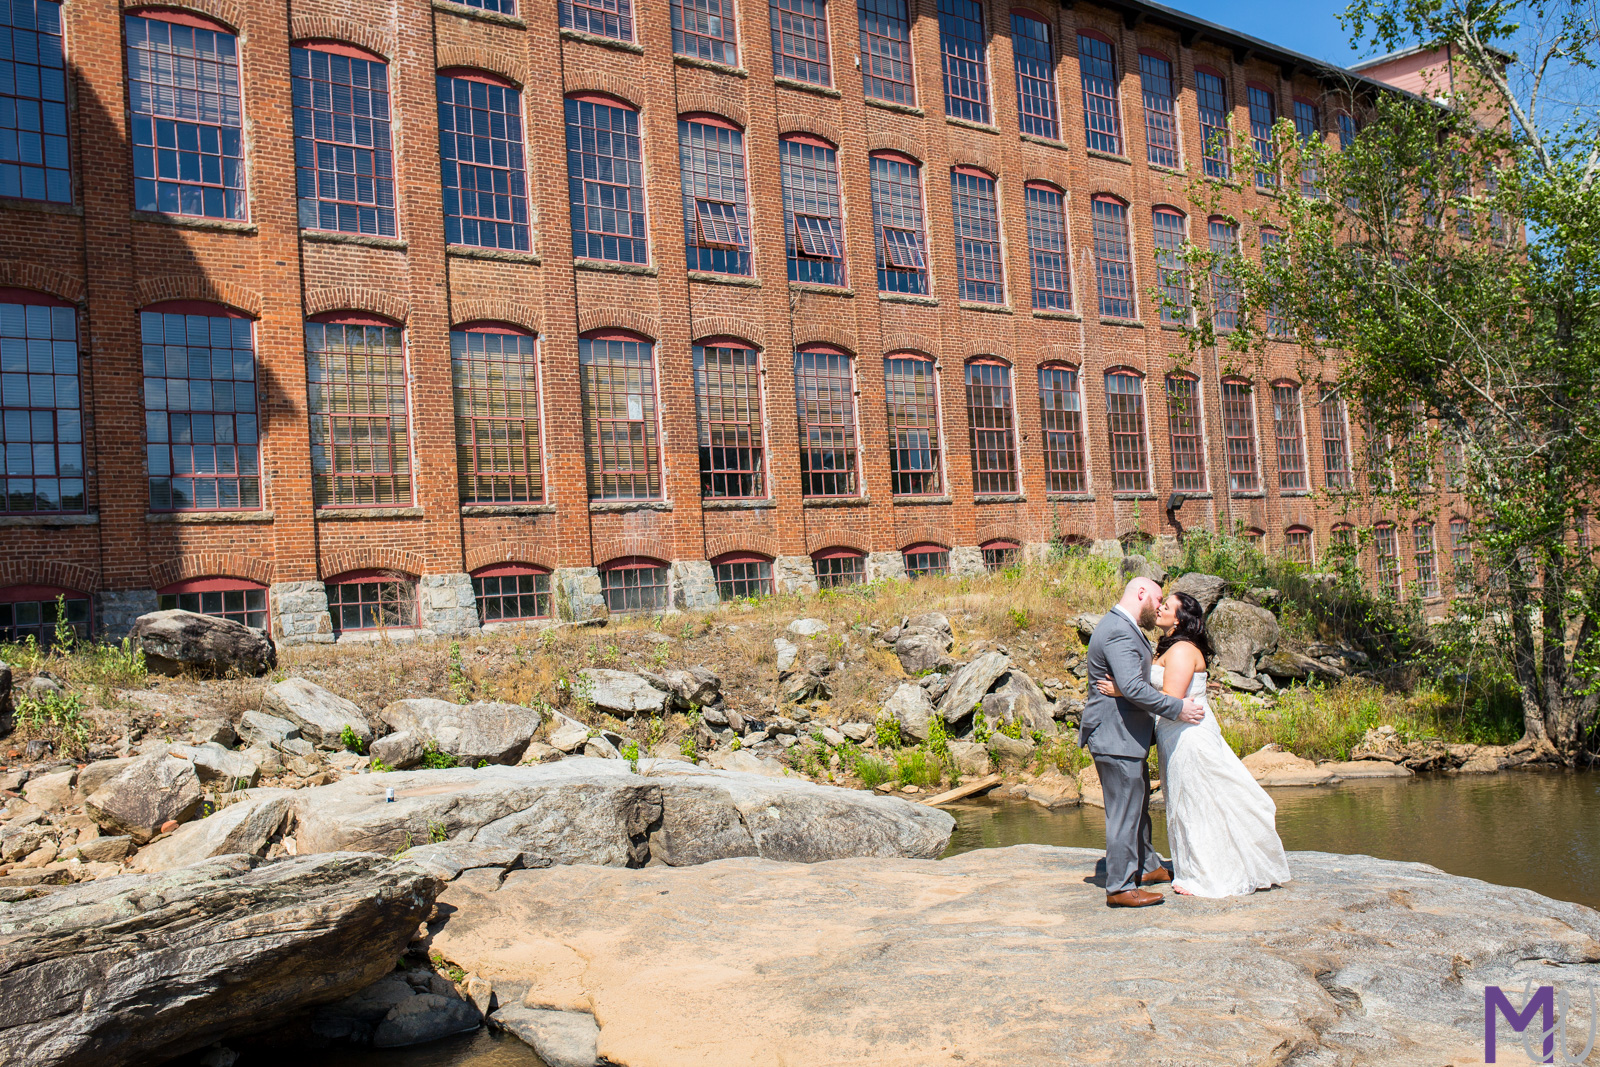 Spring Wedding at The Mill on Yellow River Georgia